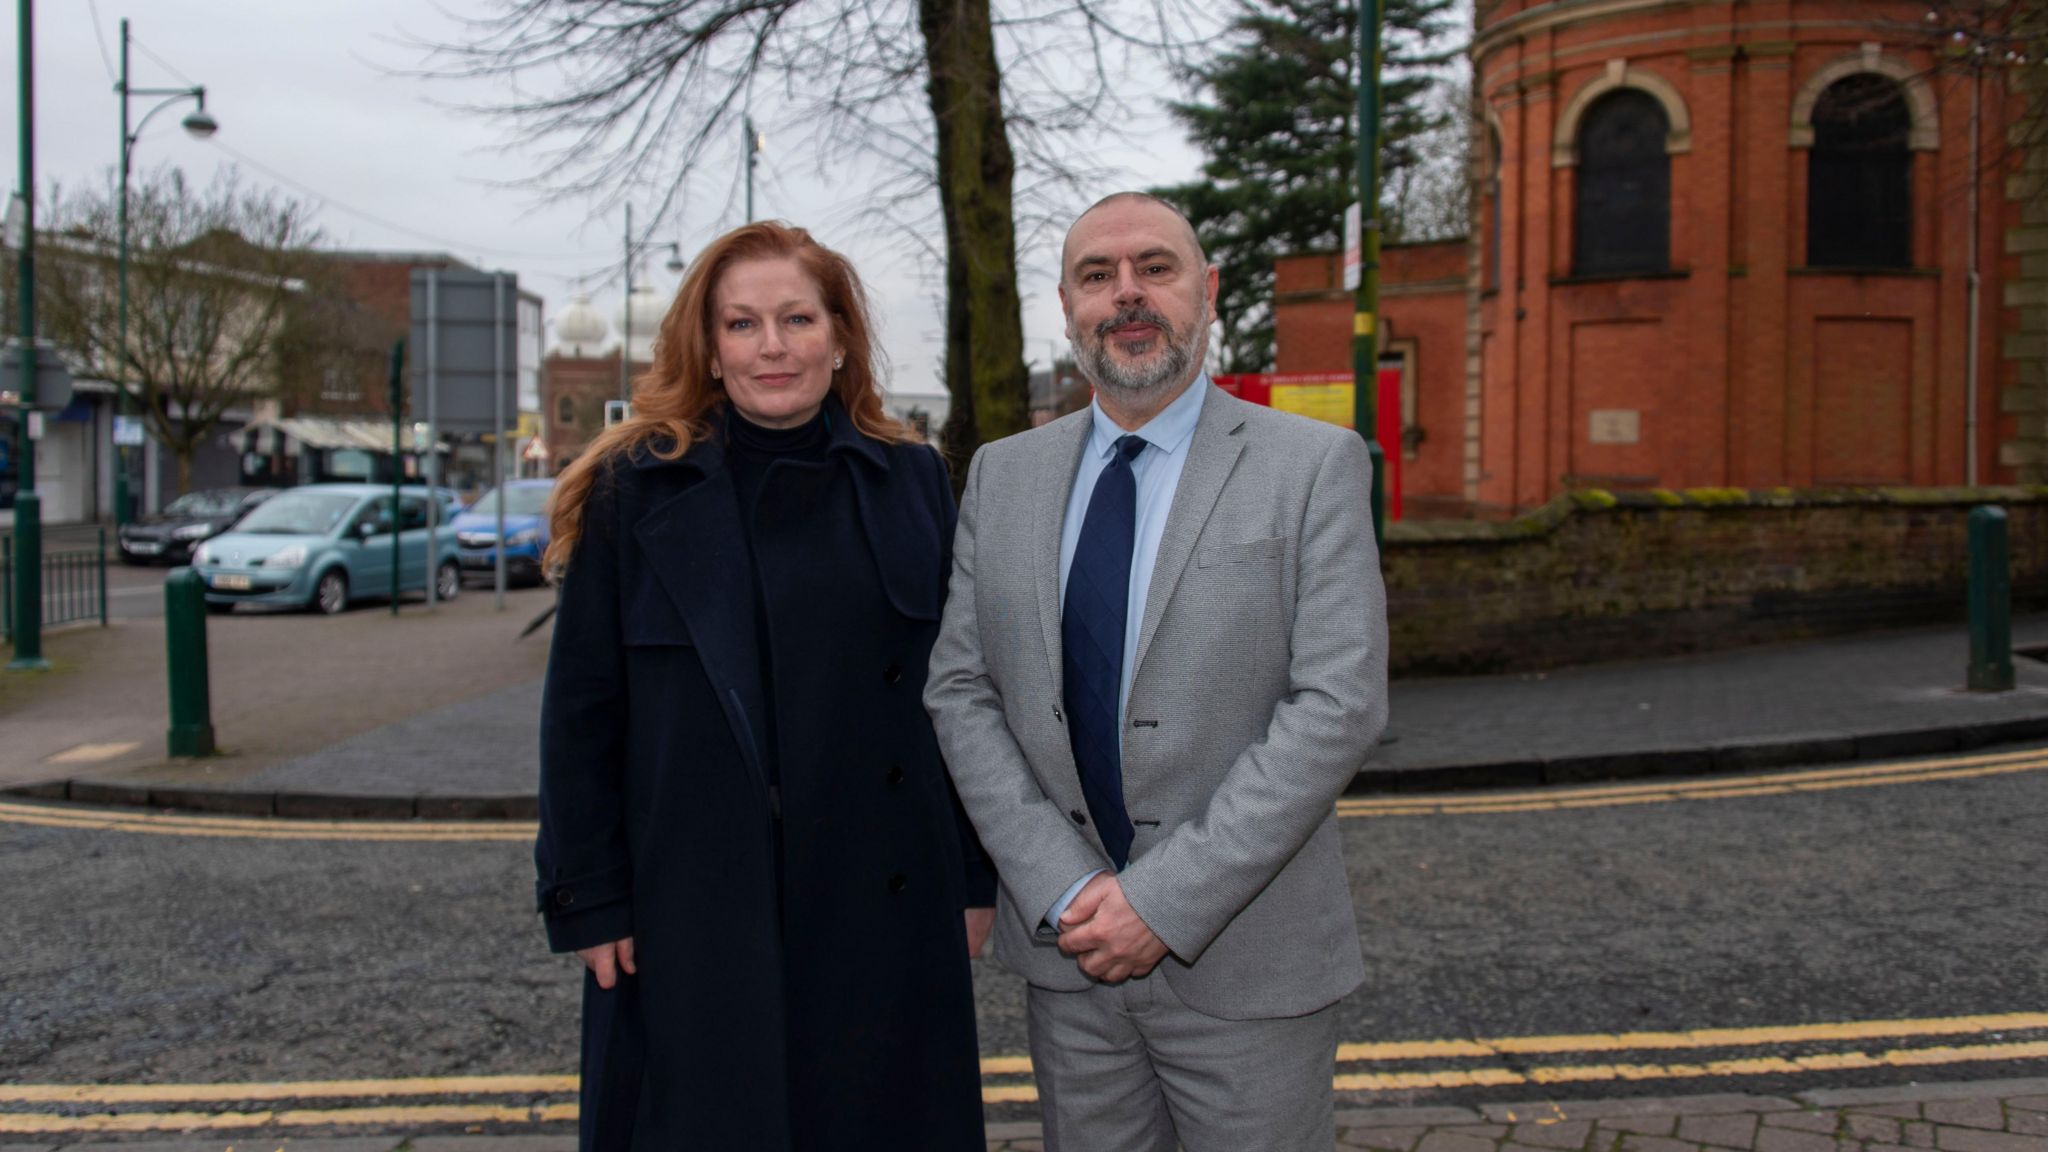 Jane Stevenson, MP for Wolverhampton North East and City Investment Board Member, and Councillor Craig Collingswood, City of Wolverhampton Council Cabinet Member for Environment and Climate Change, 